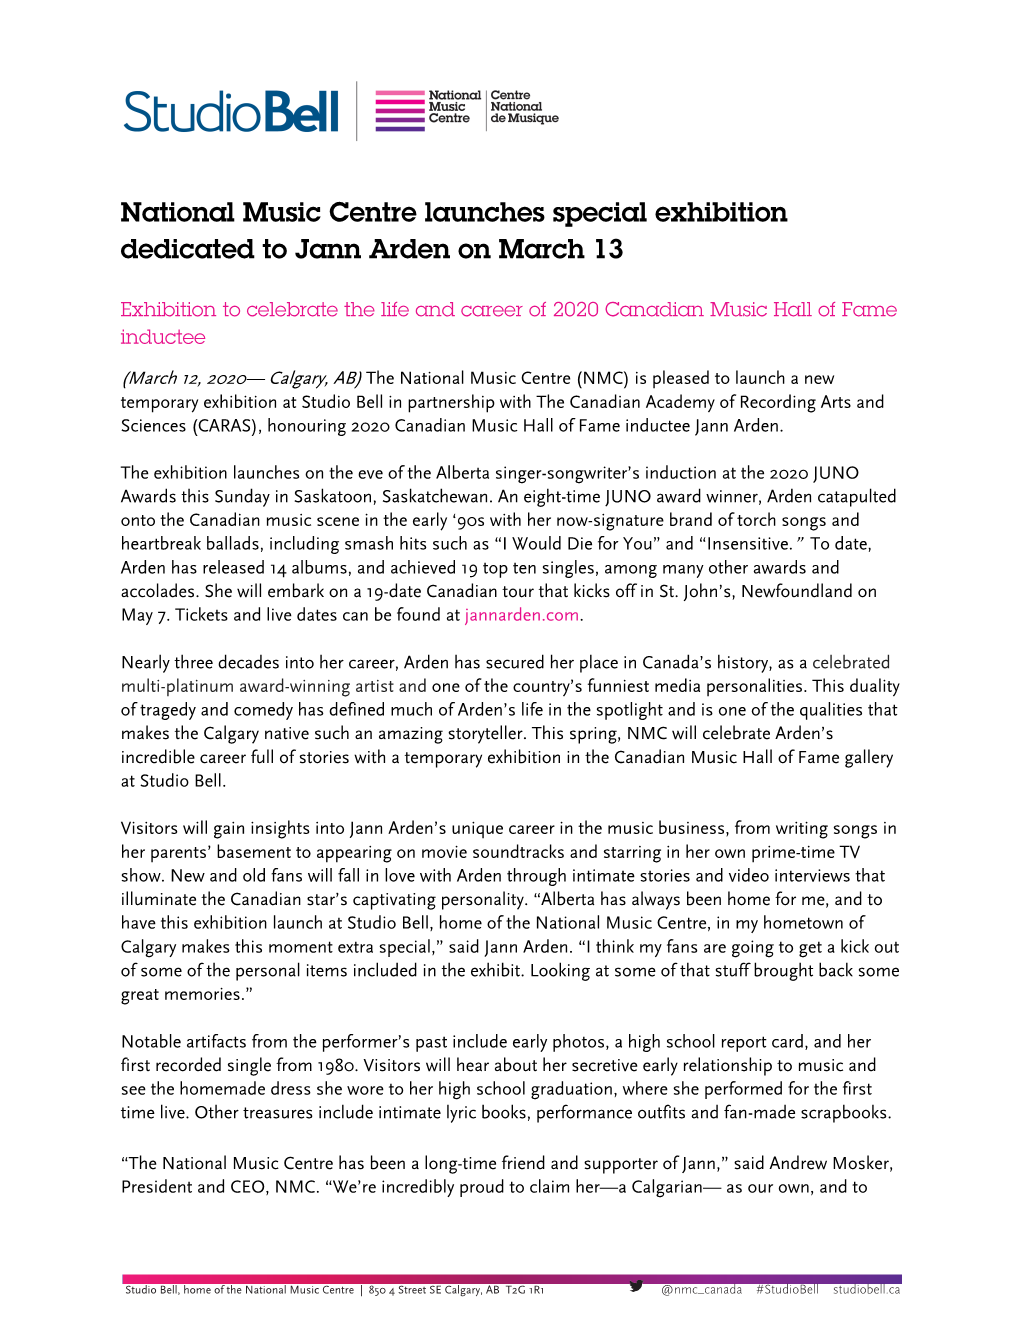 National Music Centre Launches Special Exhibition Dedicated to Jann Arden on March 13